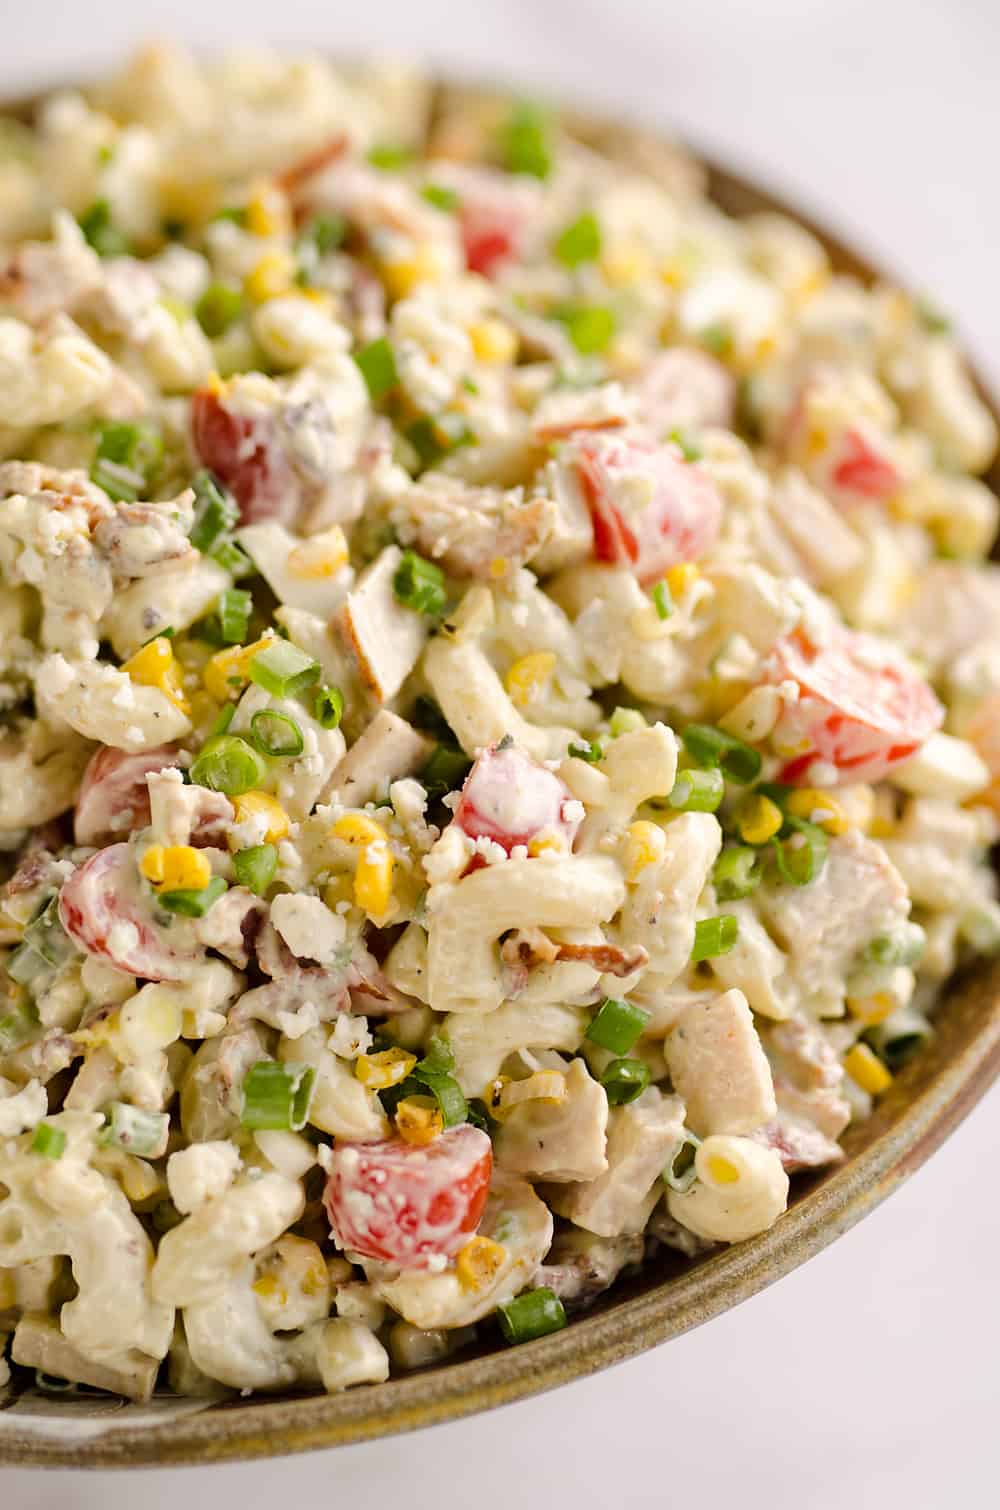 Creamy Turkey Cobb Pasta Salad is a fresh and flavorful side dish perfect for your next picnic or potluck. Pasta, Jennie-O turkey breast, bacon, bleu cheese and veggies are tossed in a zesty avocado sauce for a salad bursting with flavor and crunch. 